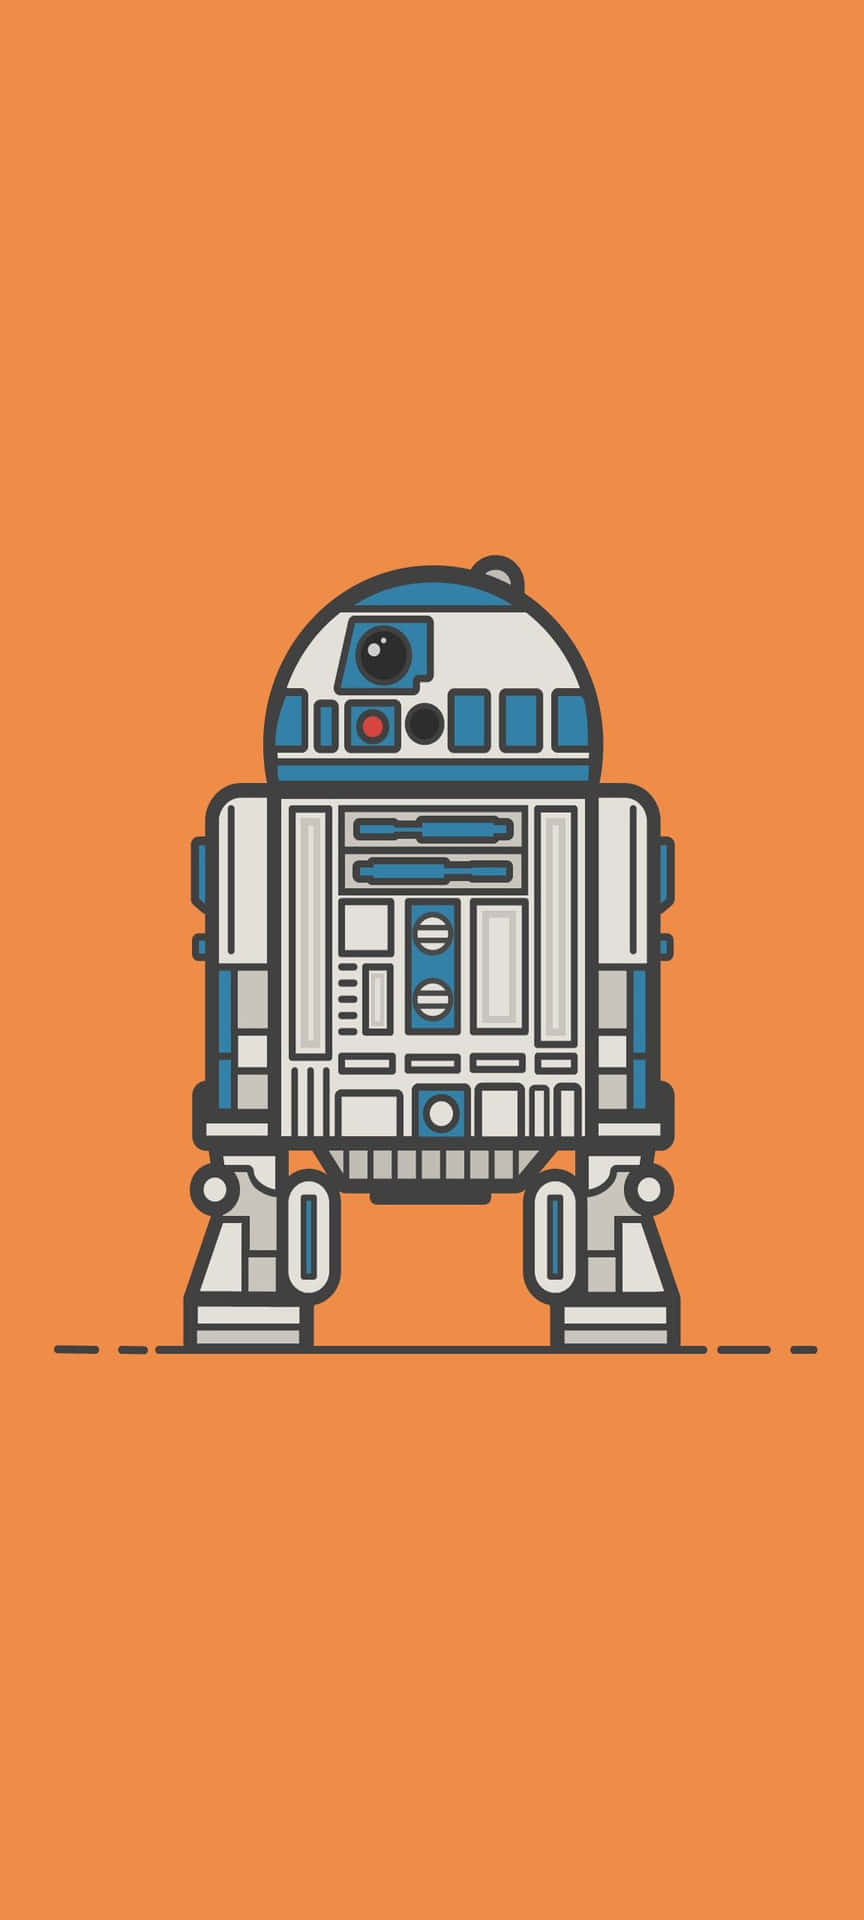 "R2D2, the iconic droid of Star Wars fame" Wallpaper